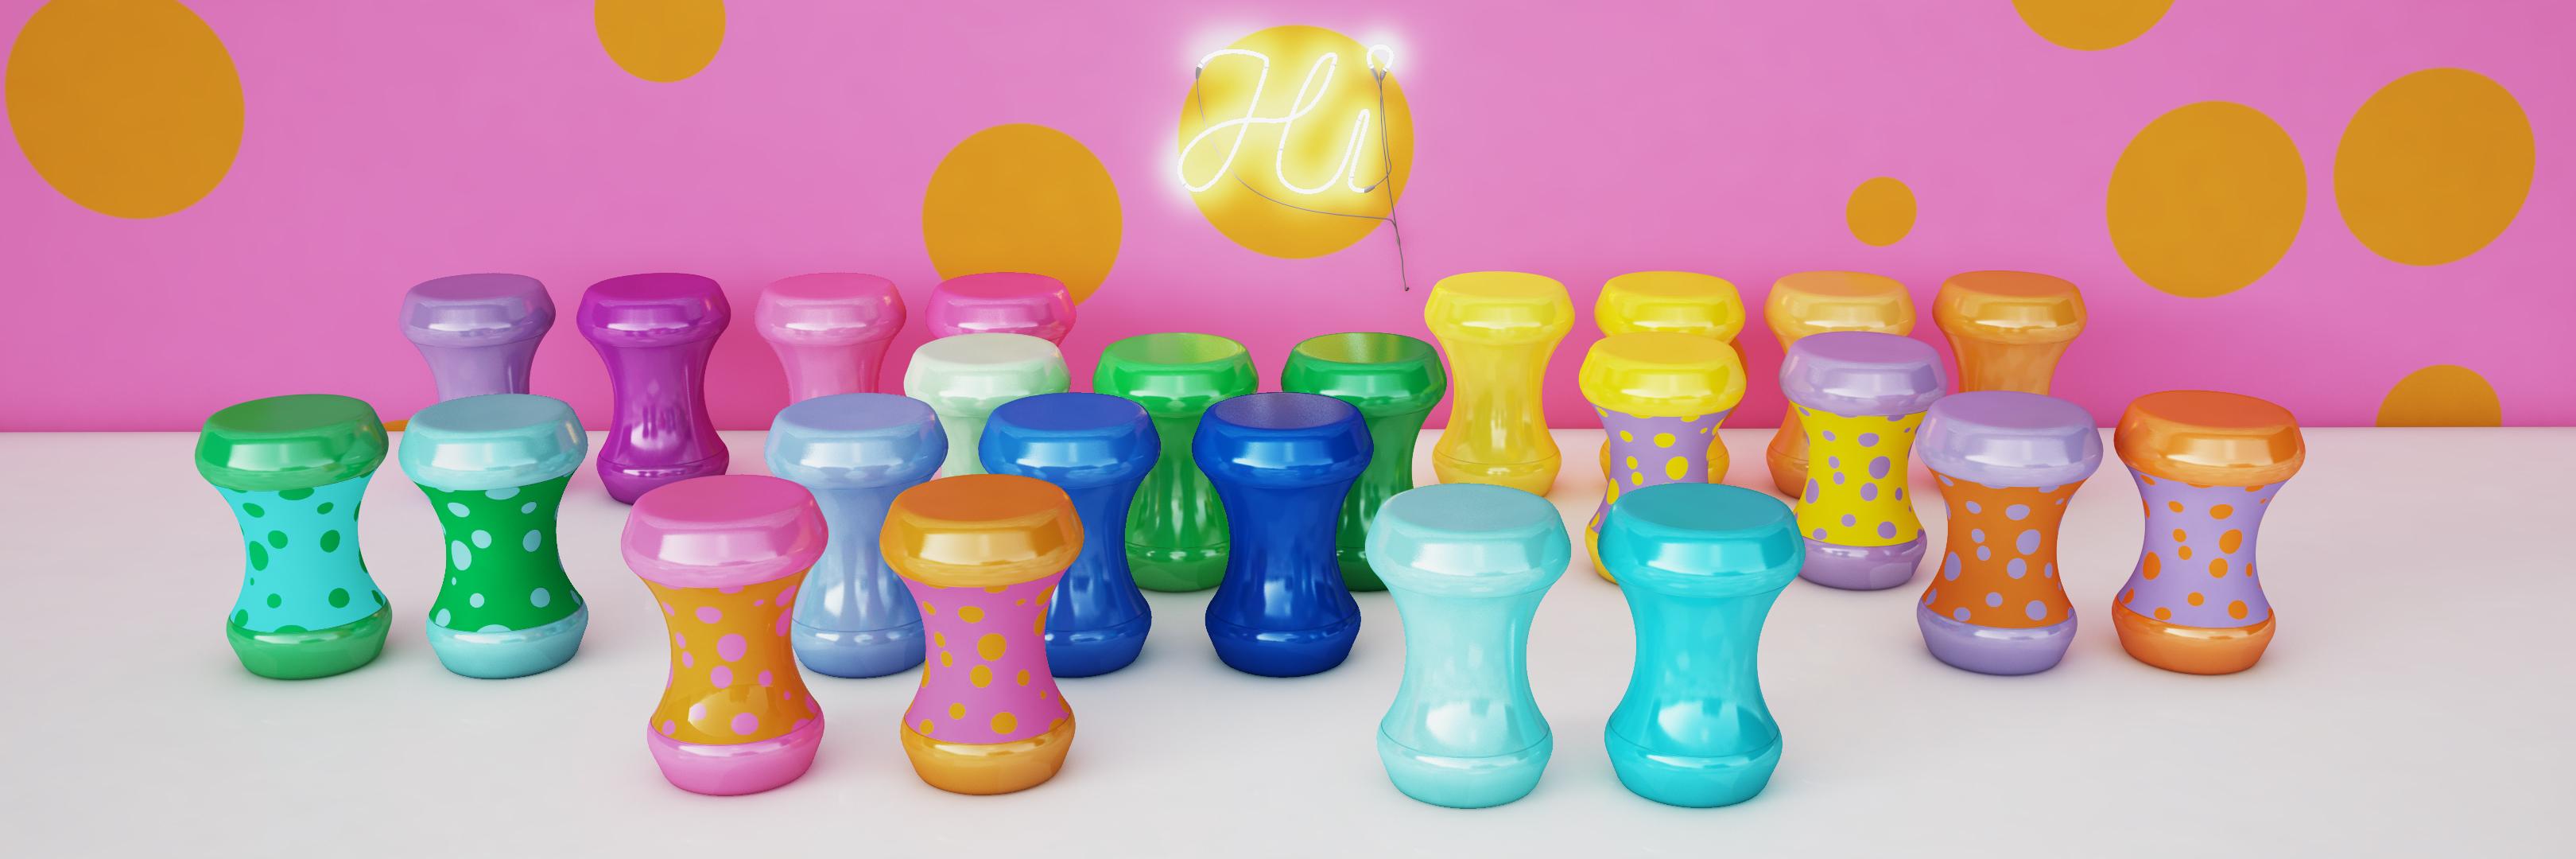 Hand-Crafted Boom Bom Table: Multicolor Pop Art-Inspired Side Table